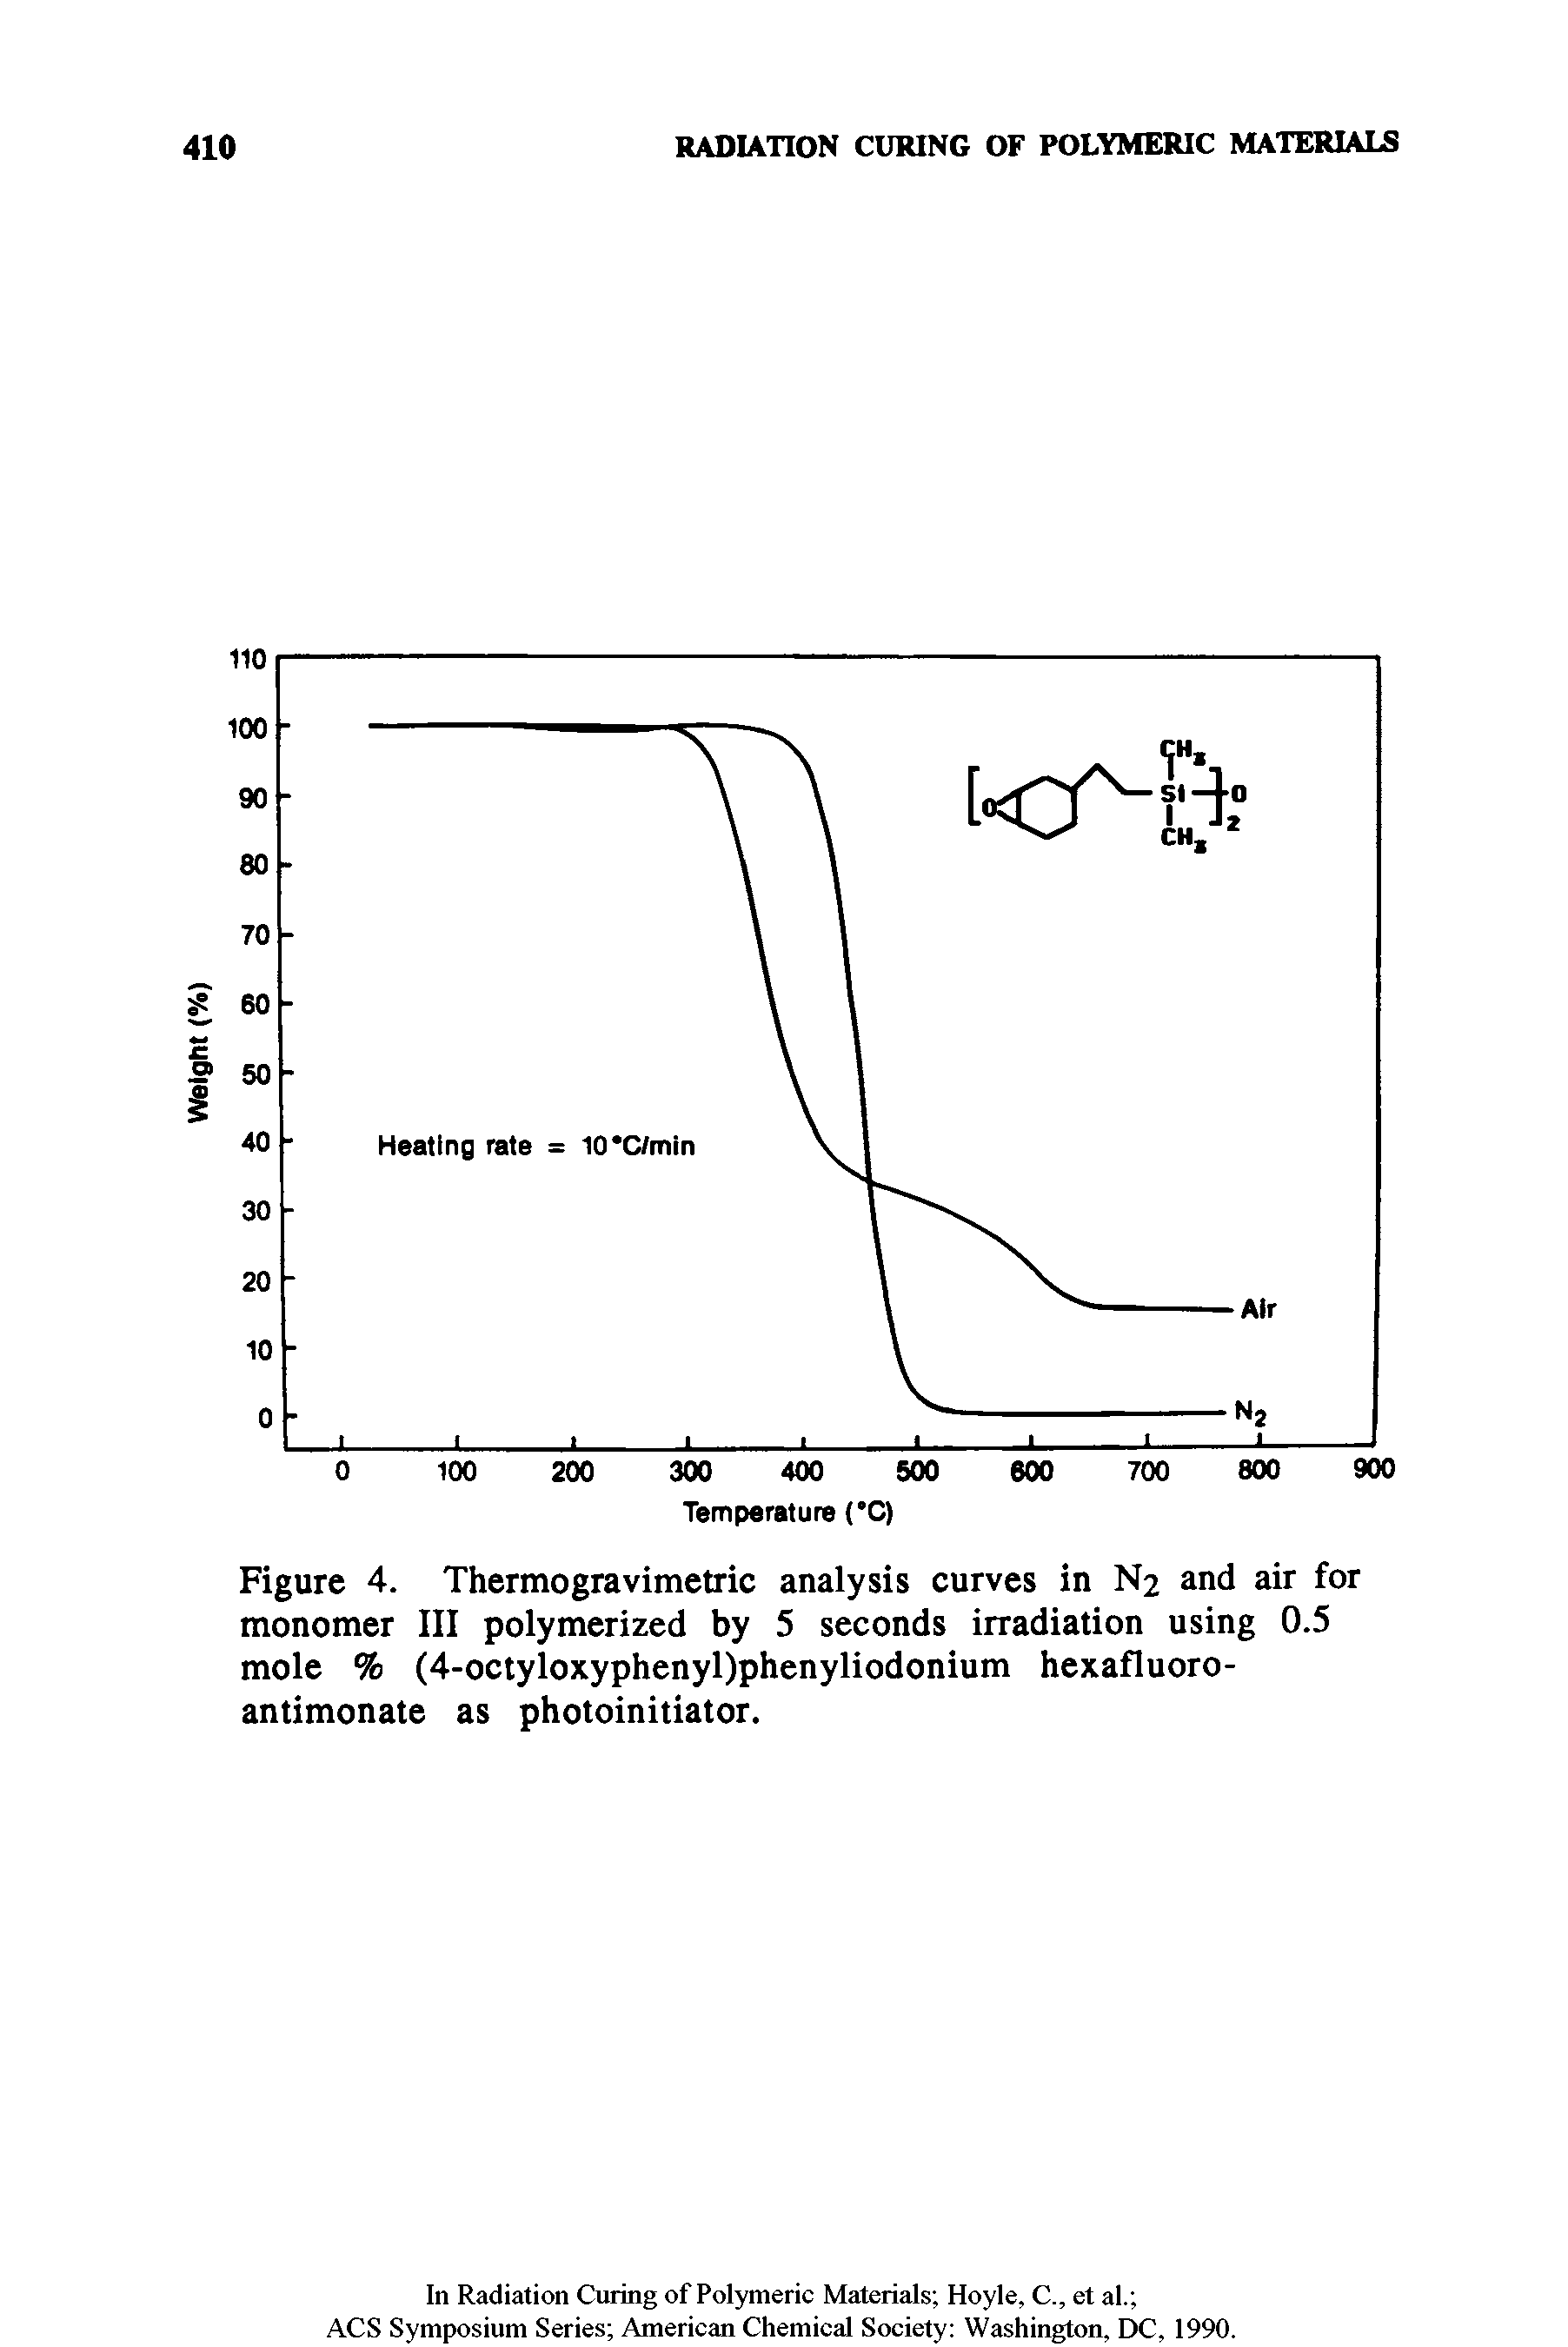 Figure 4. Thermogravimetric analysis curves in N2 and air for monomer III polymerized by S seconds irradiation using 0.5 mole % (4-octyloxyphenyl)phenyliodonium hexafluoro-antimonate as photoinitiator.